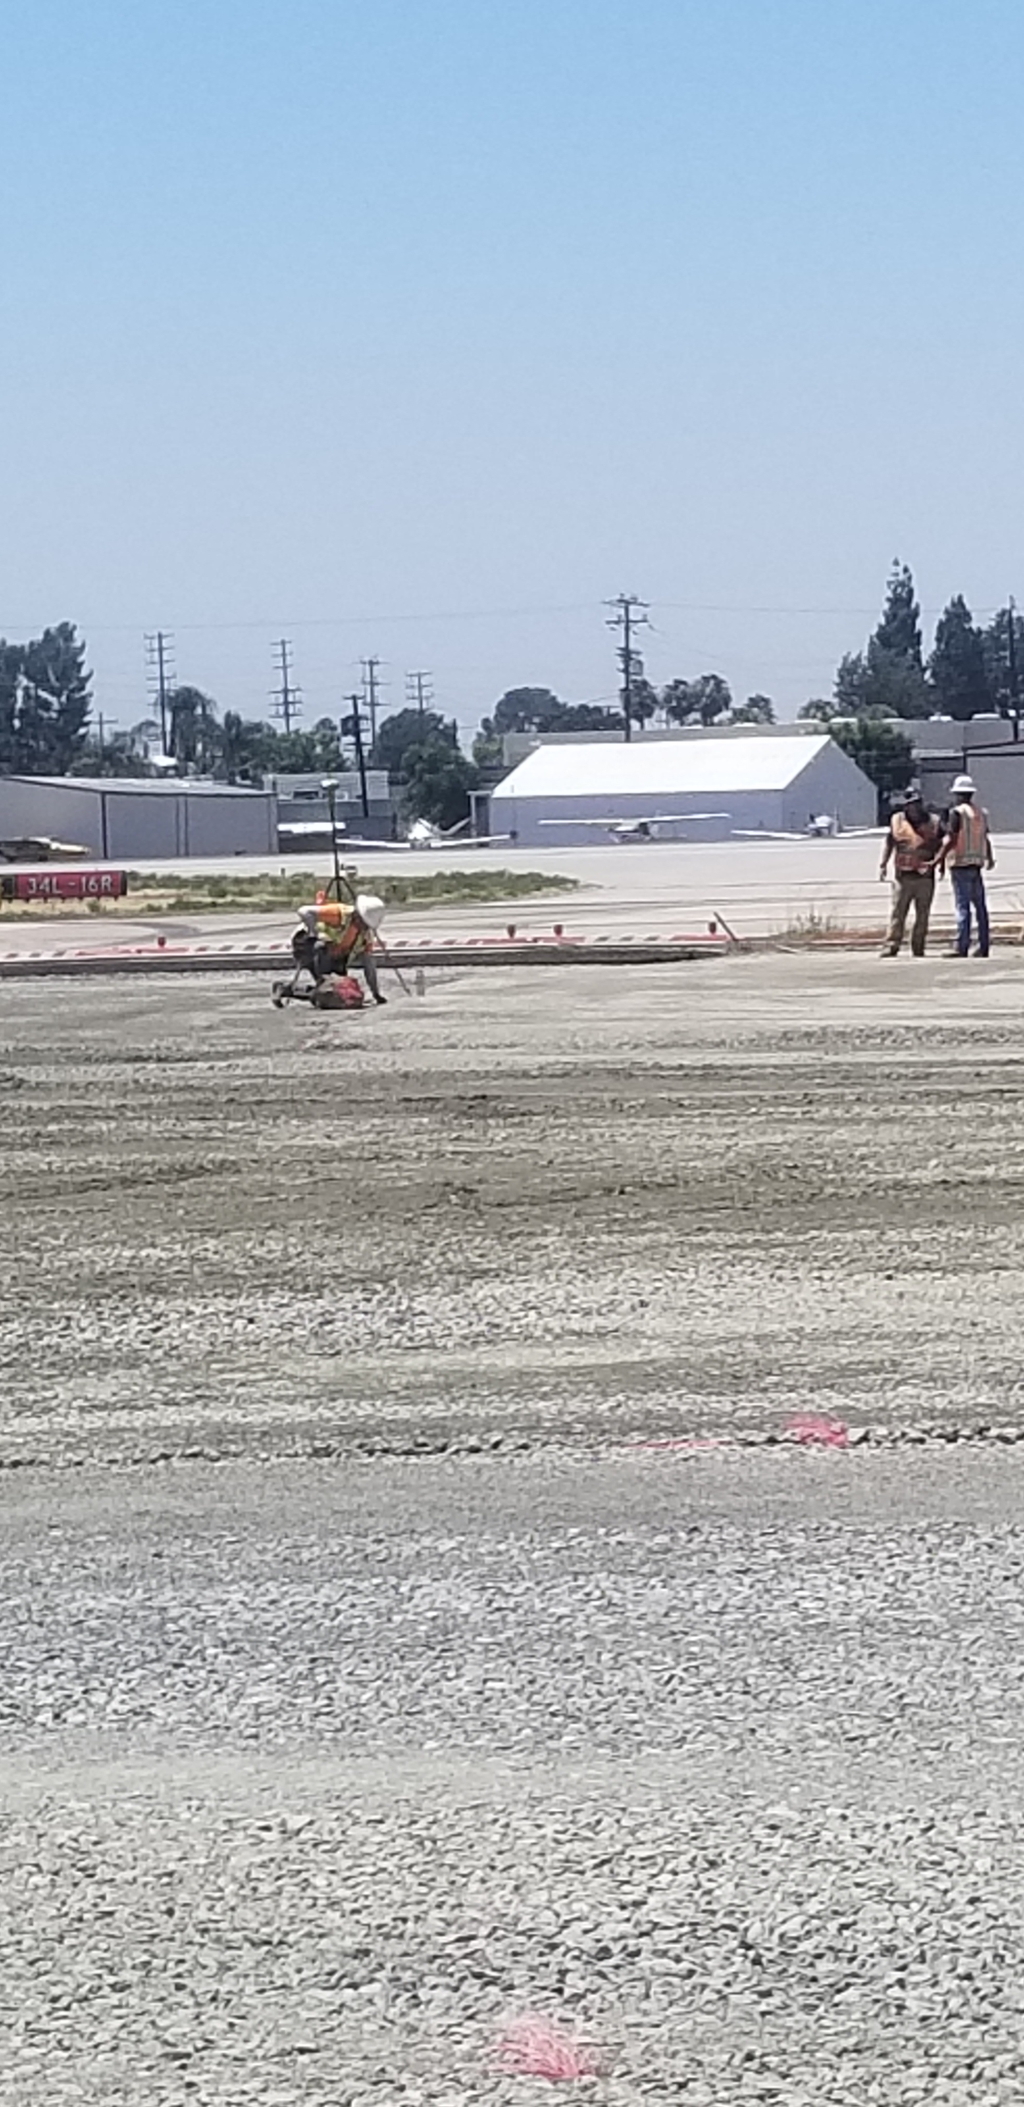 Taxiway B Project - Phase 6 - Week 6